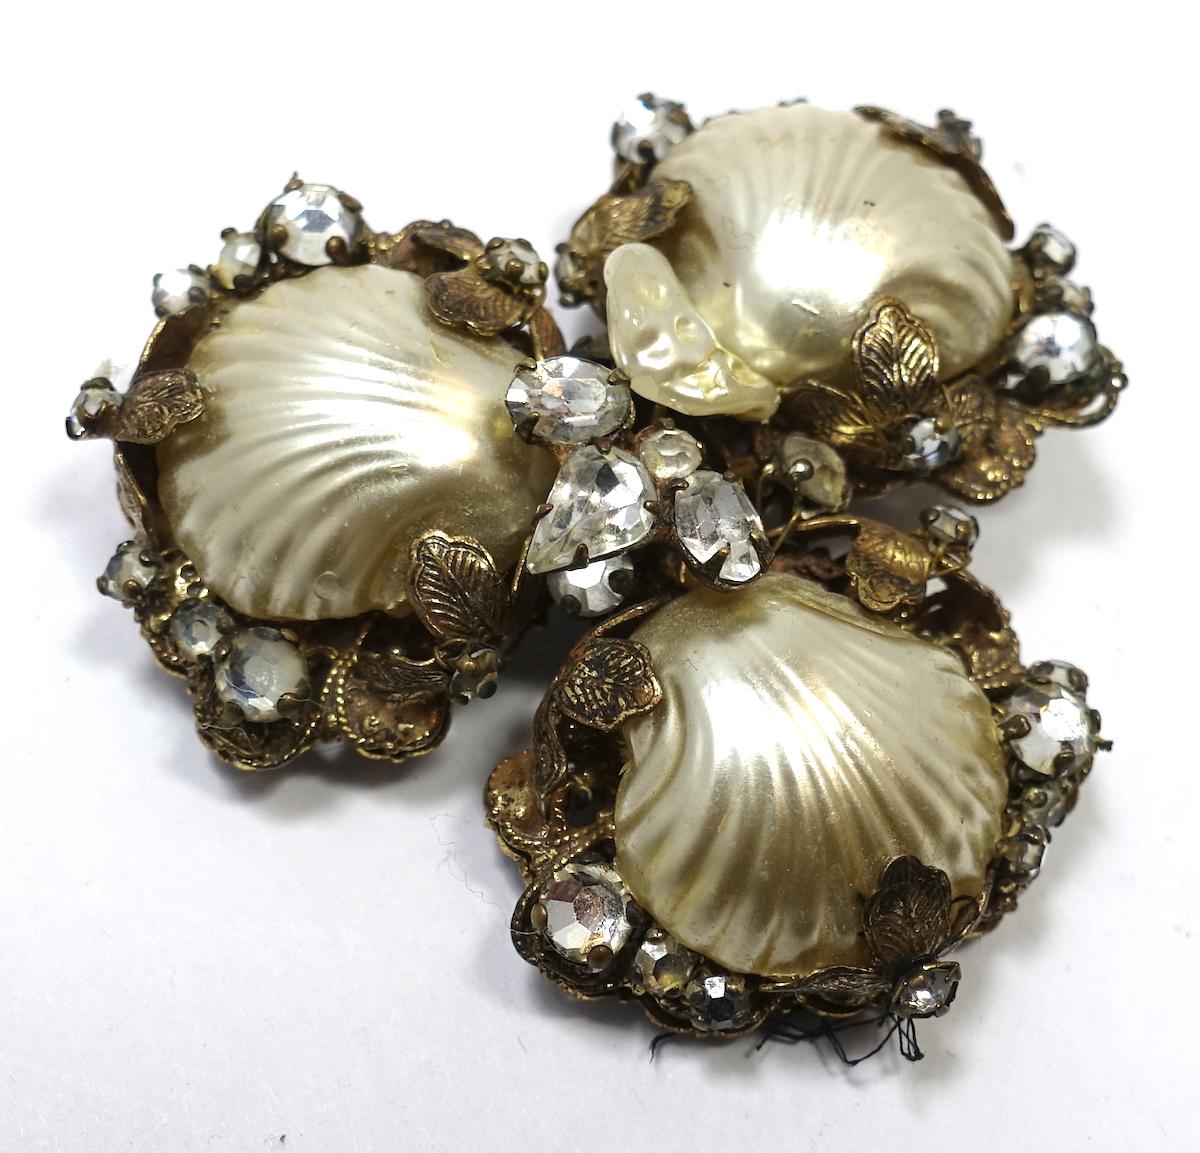 This vintage signed Original by Robert brooch from the 1950s has 3 faux pearl seashells with small faux pearls and clear rhinestones on the outside and center. It is in a gold tone setting.  In excellent condition, this brooch measures 2” x 2”, and